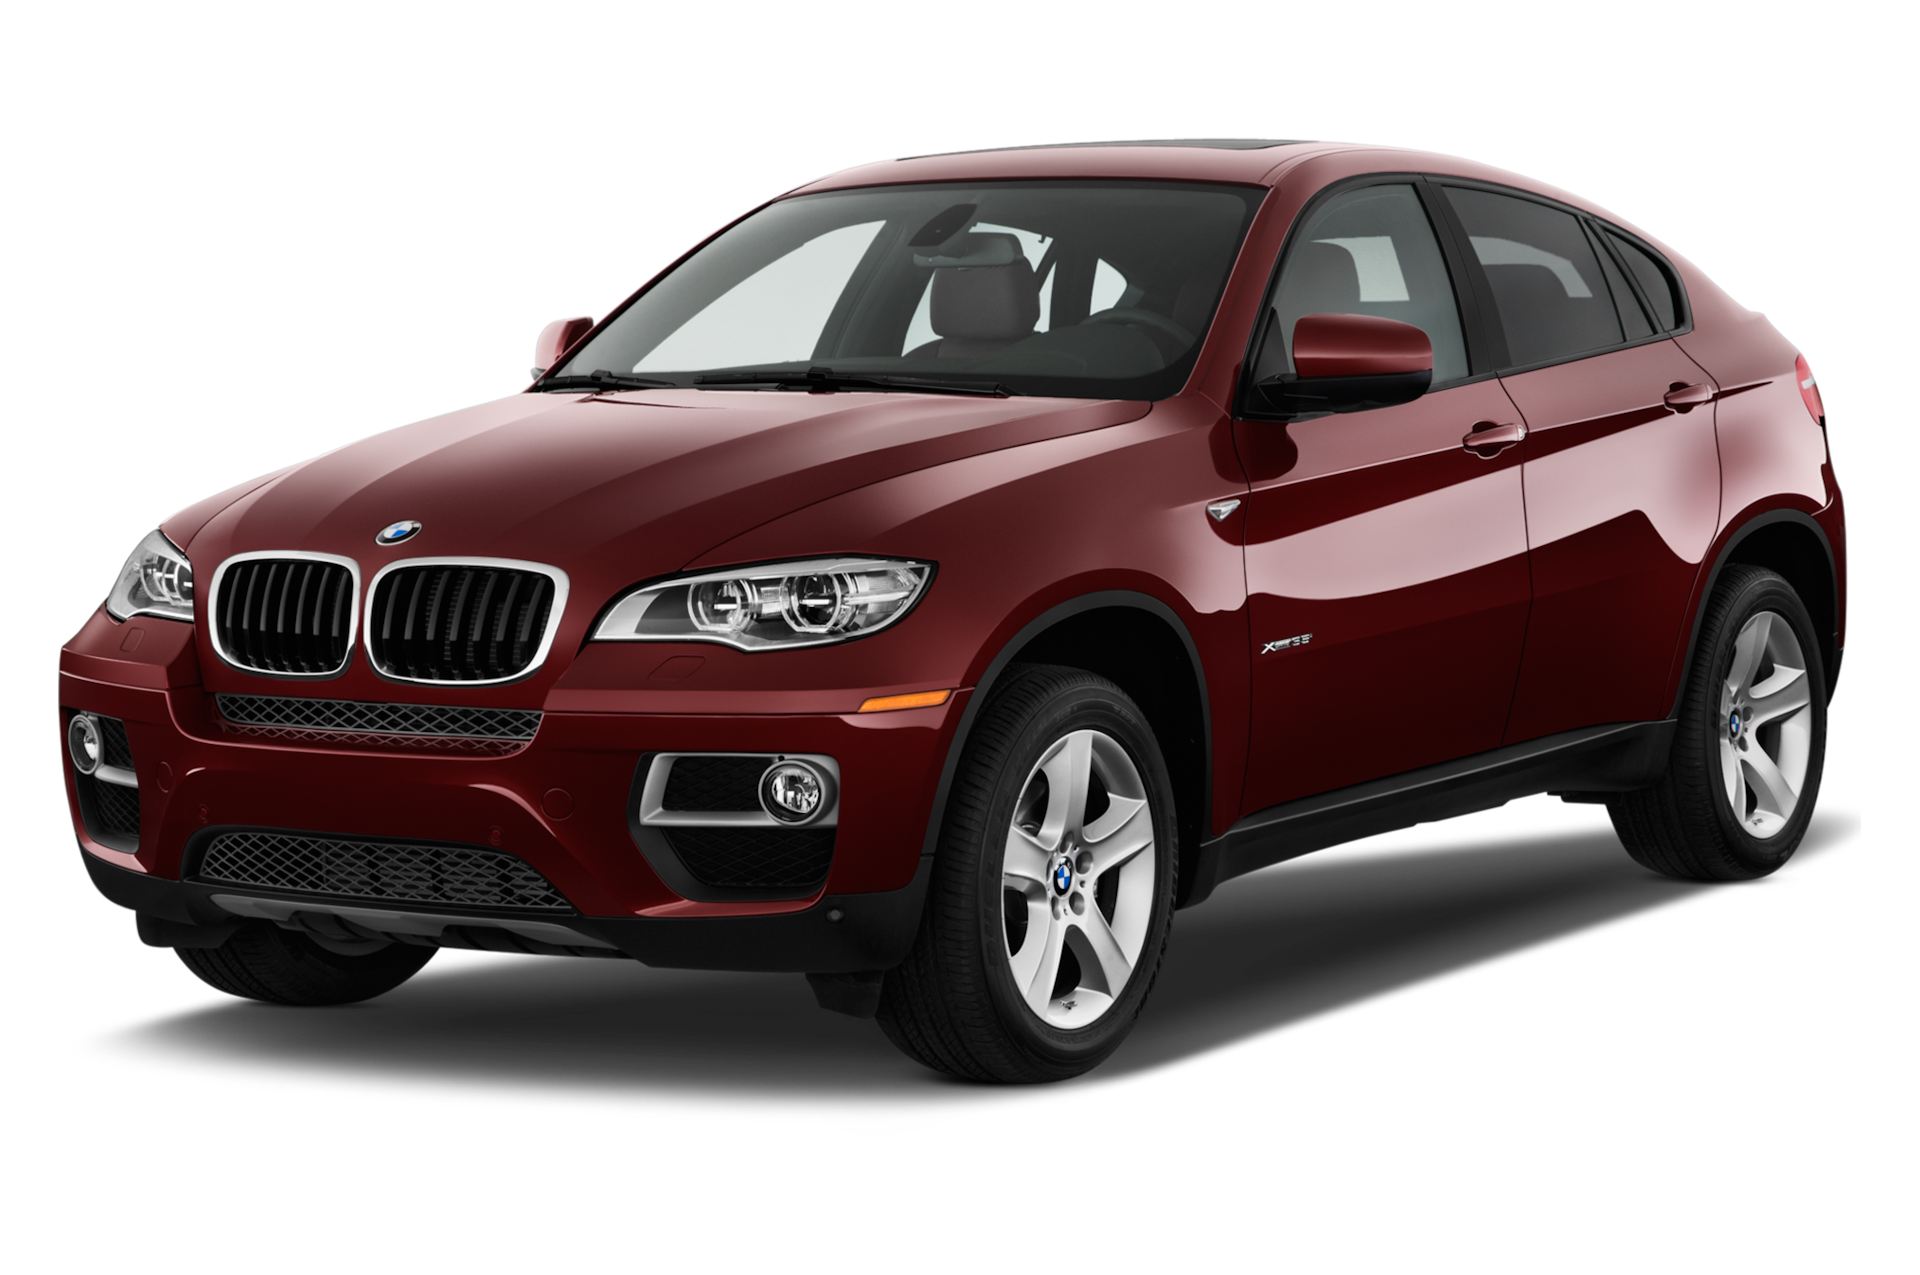 2014 BMW X6 Prices, Reviews, and Photos - MotorTrend